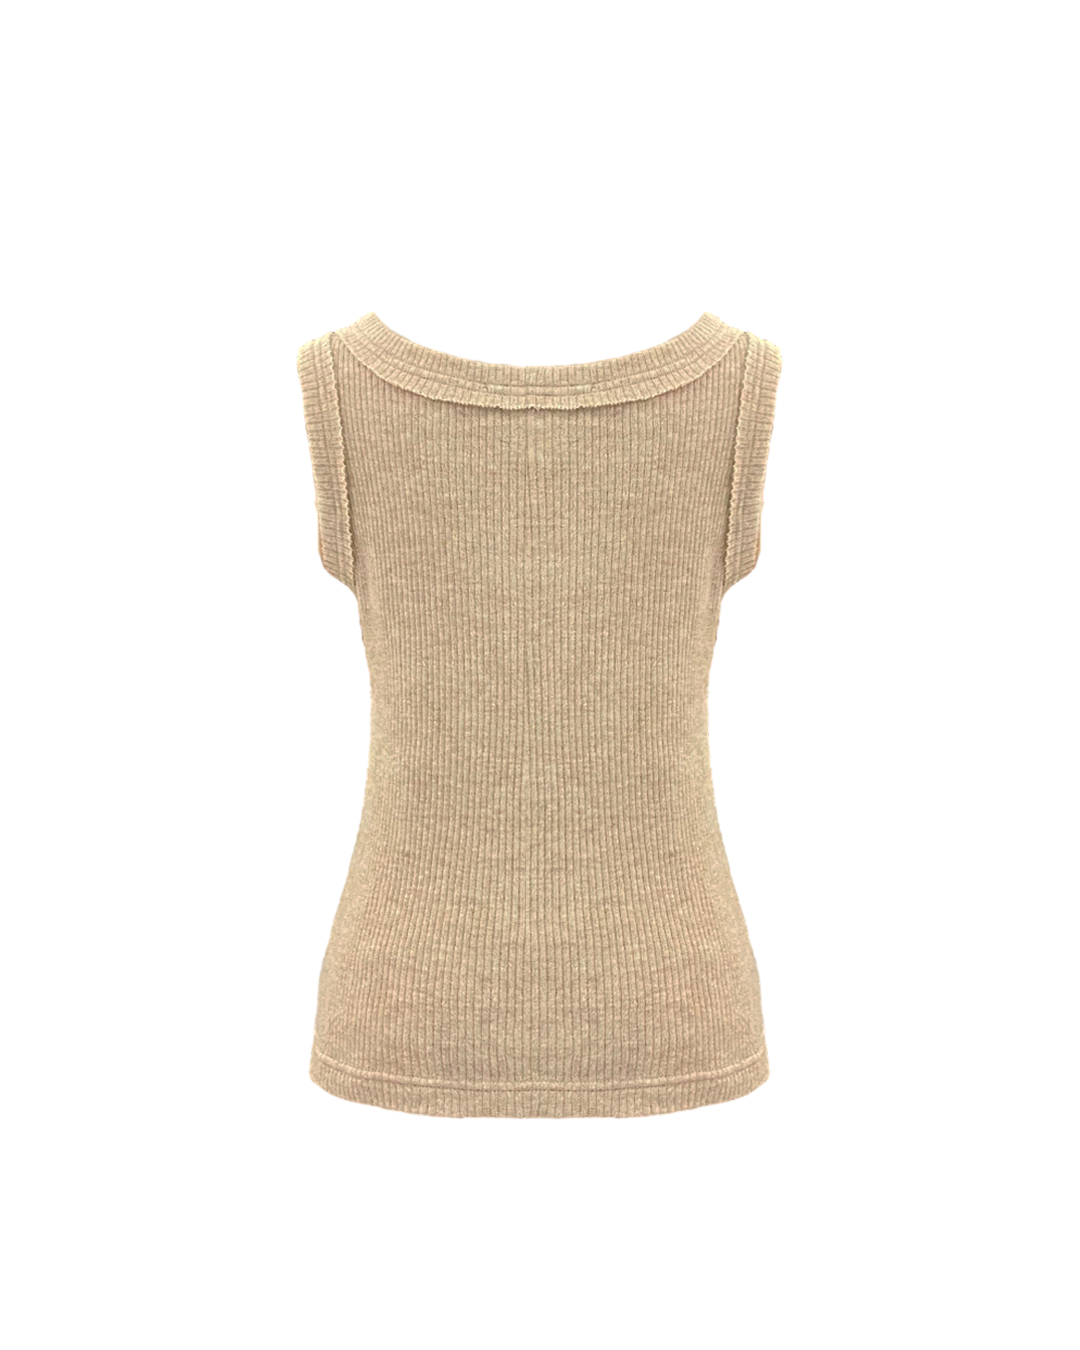 KNIT BEIGE TOP AW23/24